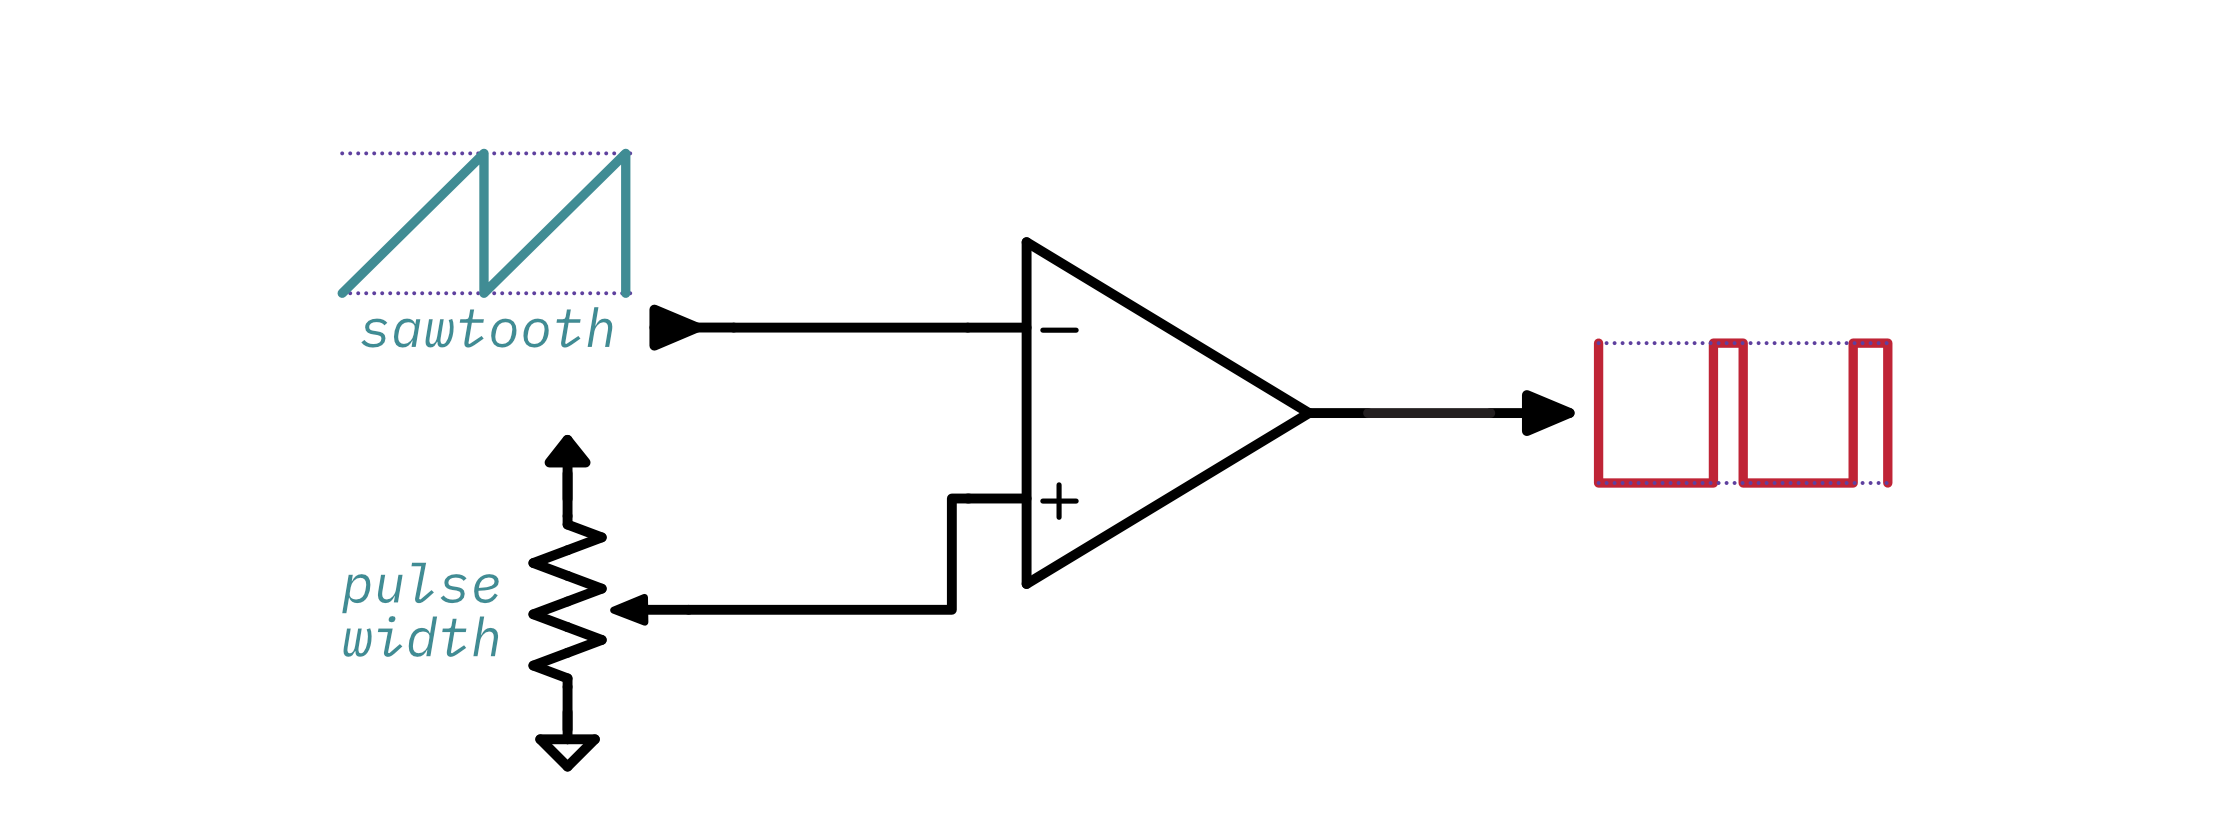 The circuit for creating a variable-pulse waveform from a sawtooth waveform